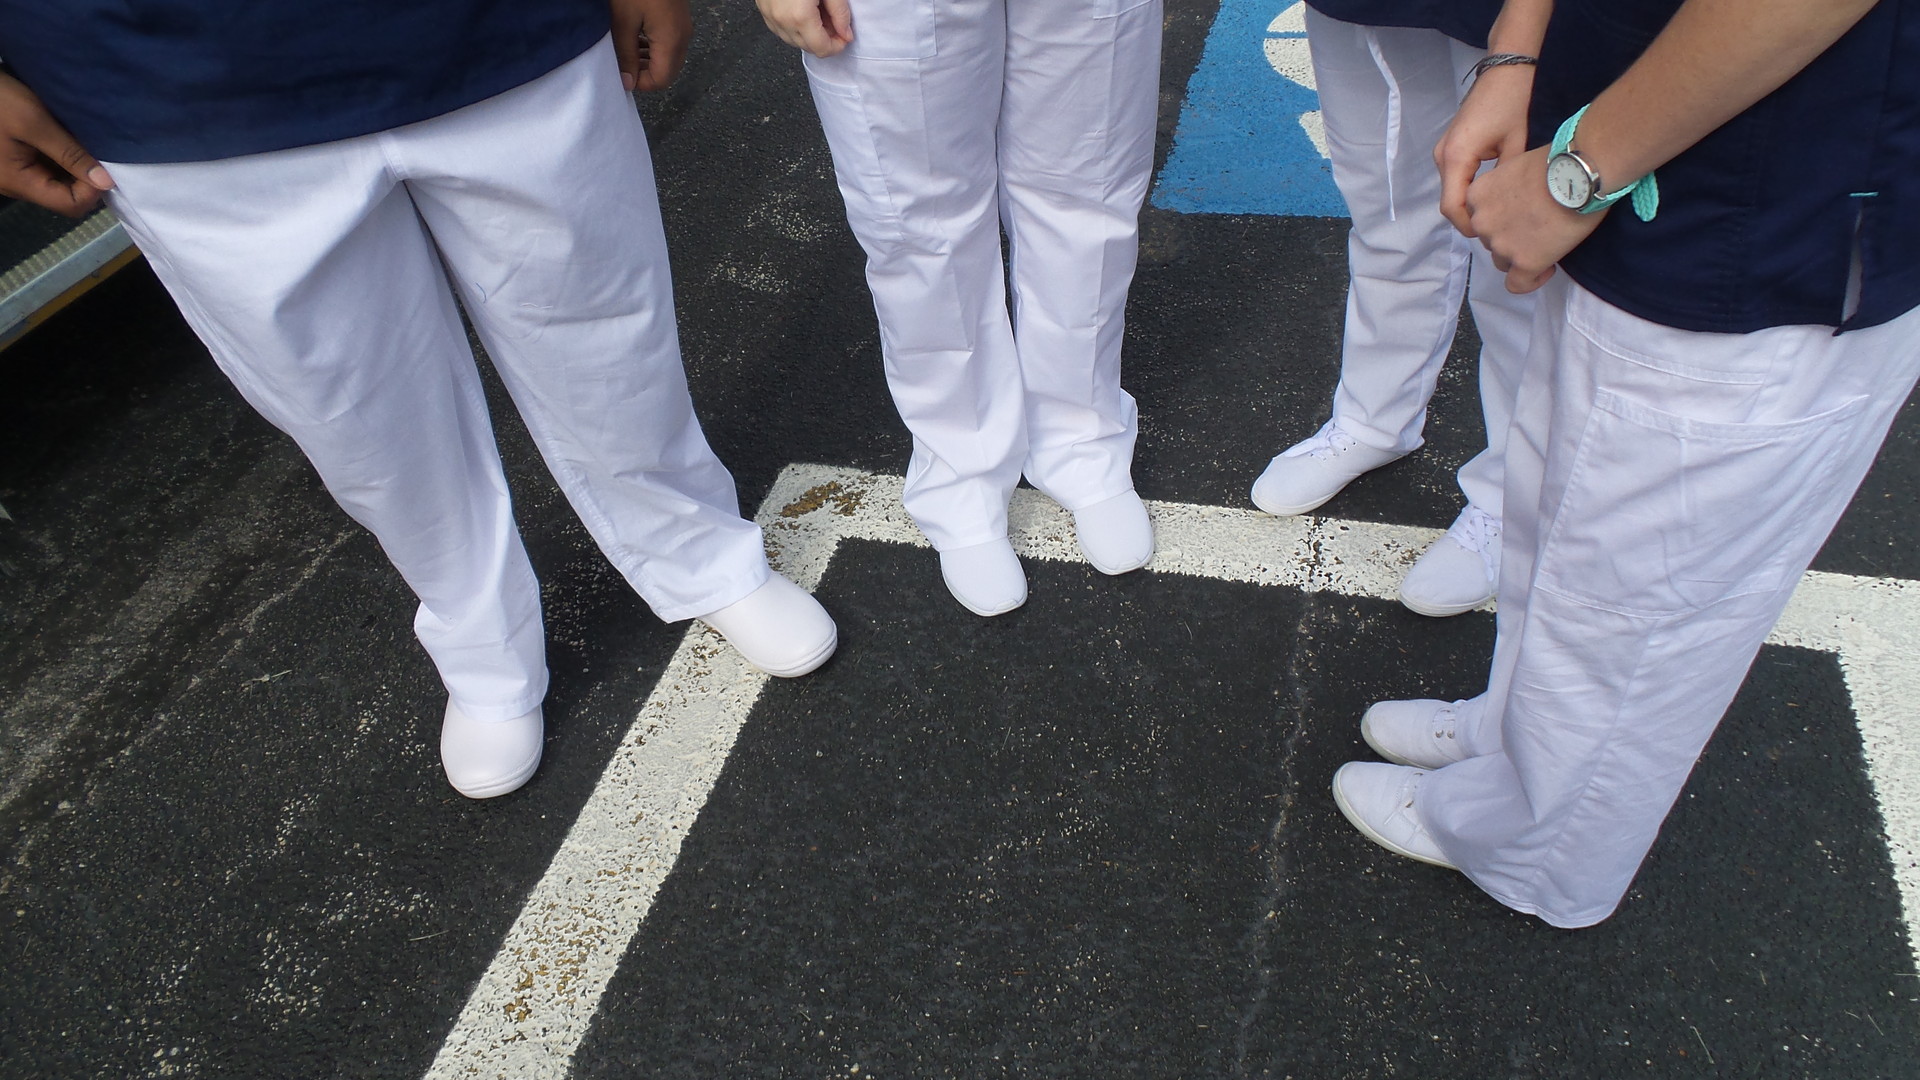 Students display white uniform shoes